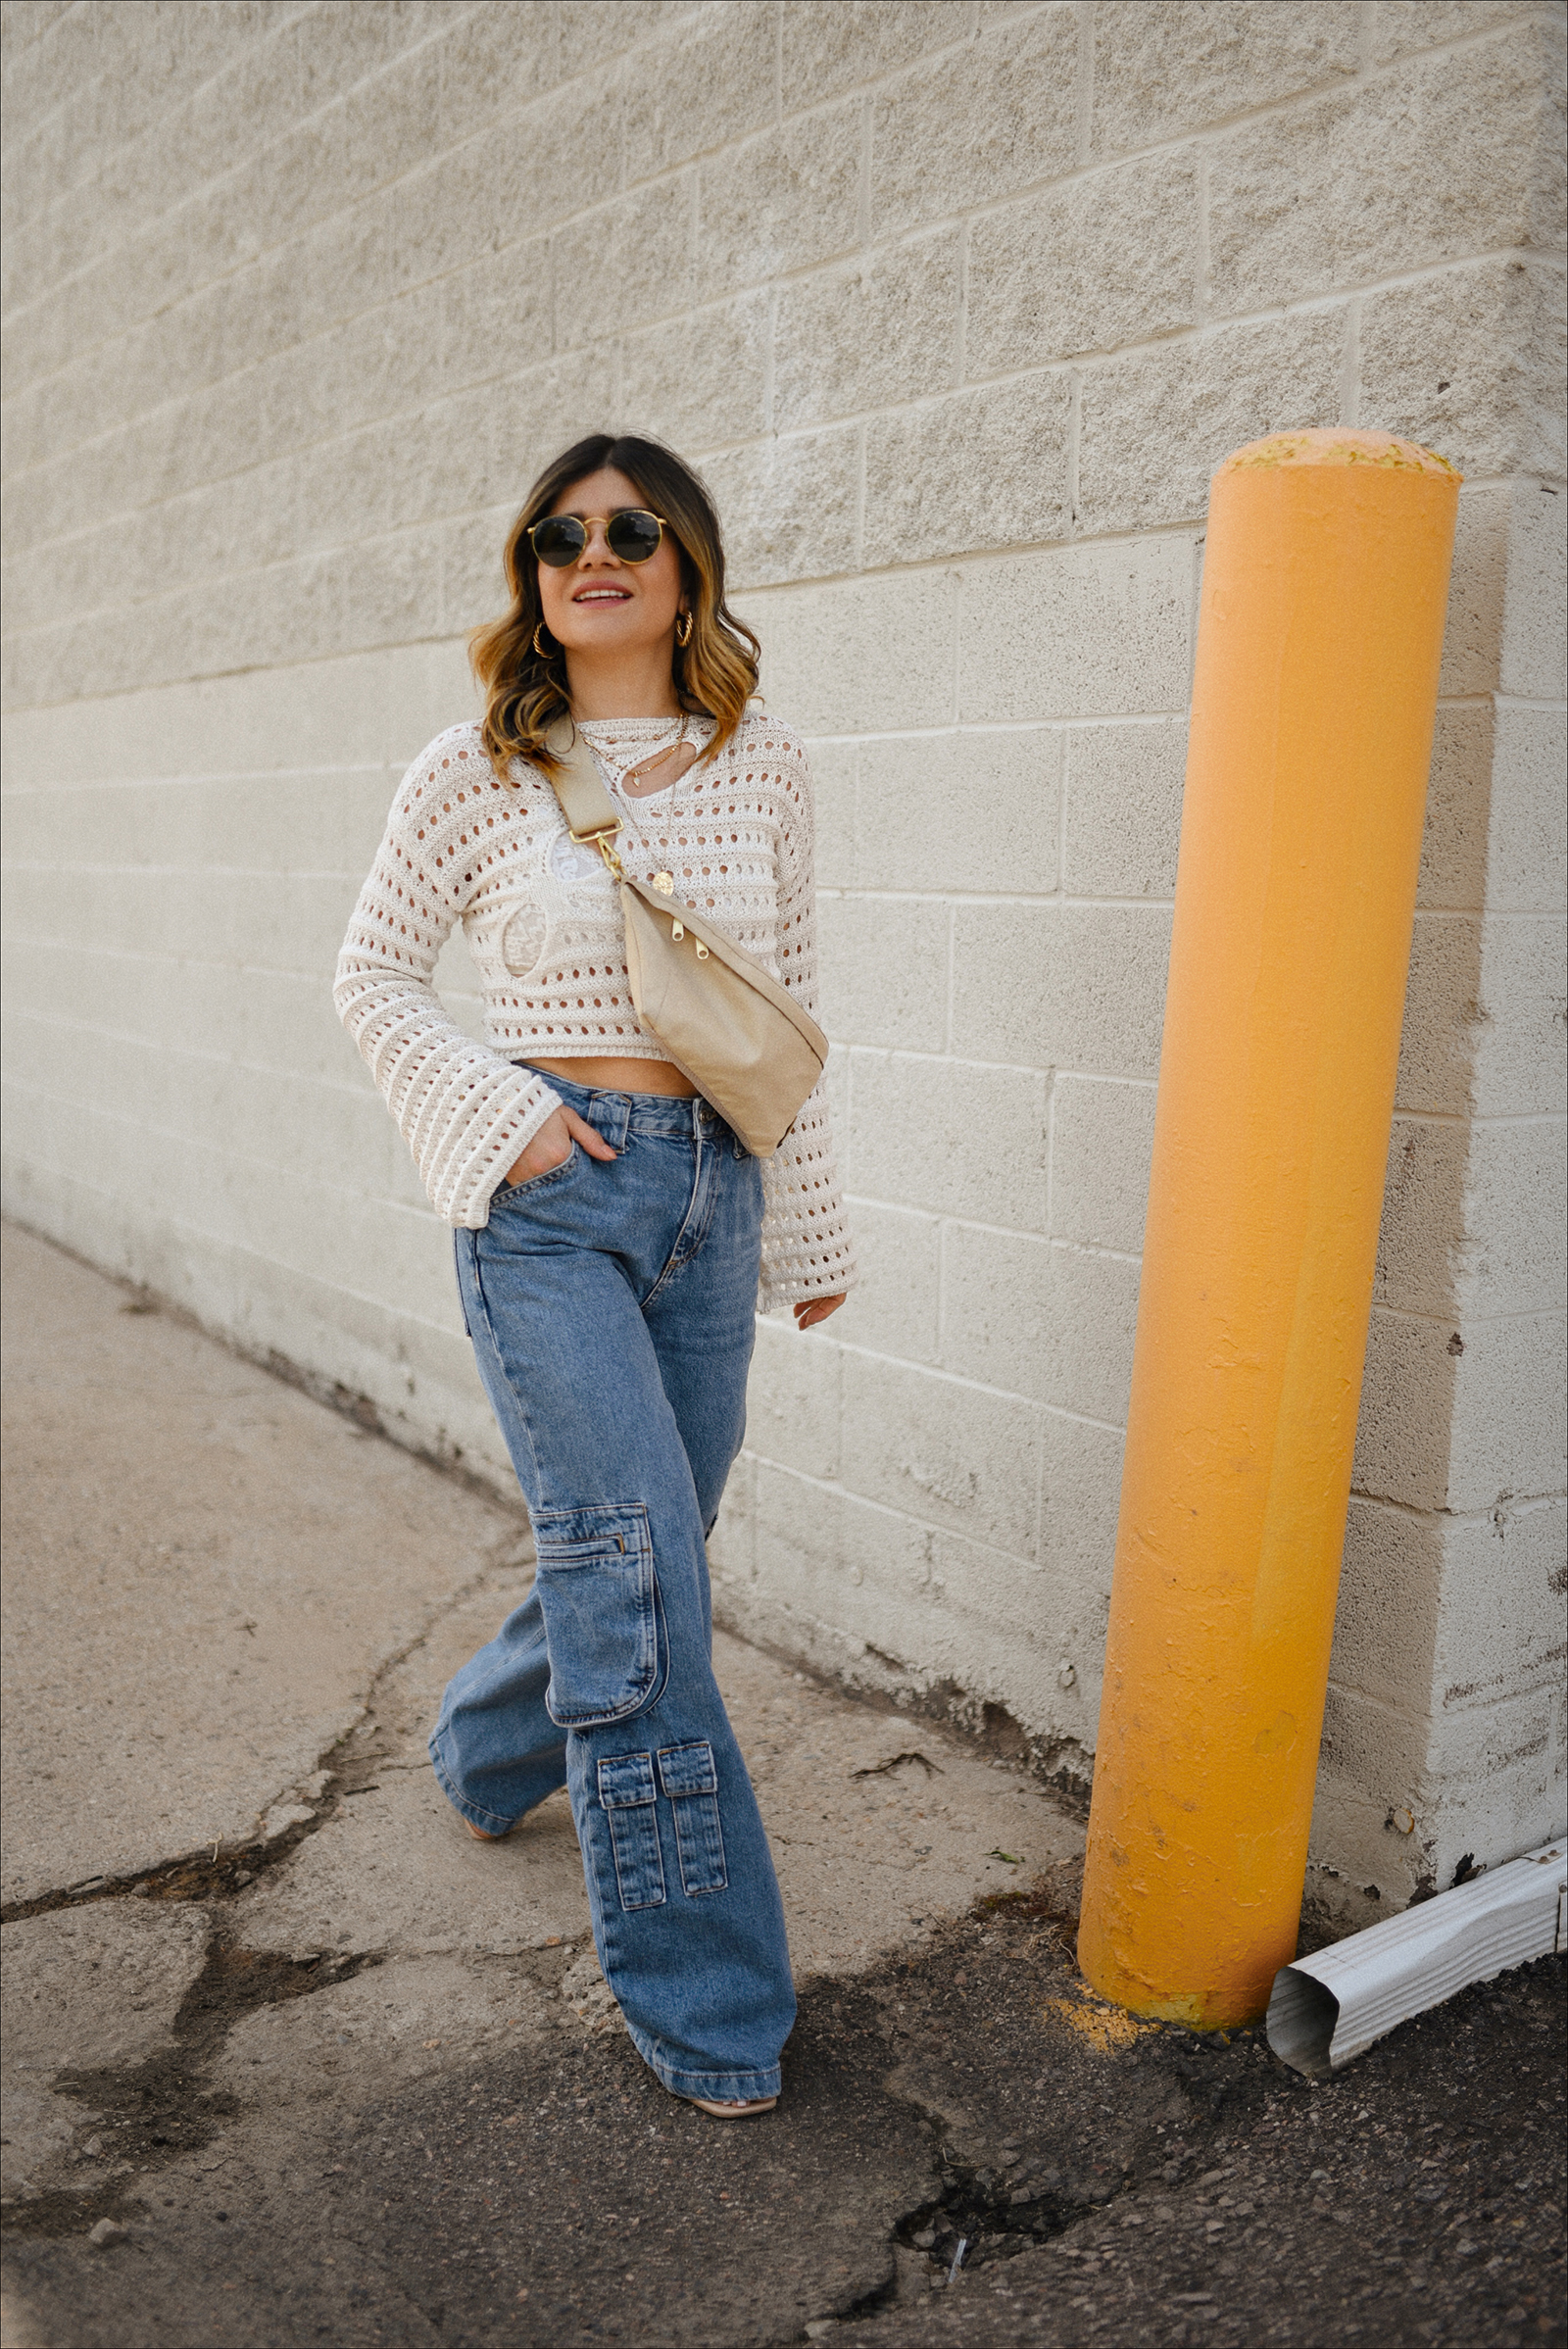 Carolina Hellal of Chic Talk wearing denim cargo jeans for summer via Mango, knit sweater from Amazon fashion, and a fanny pack via Canvelle